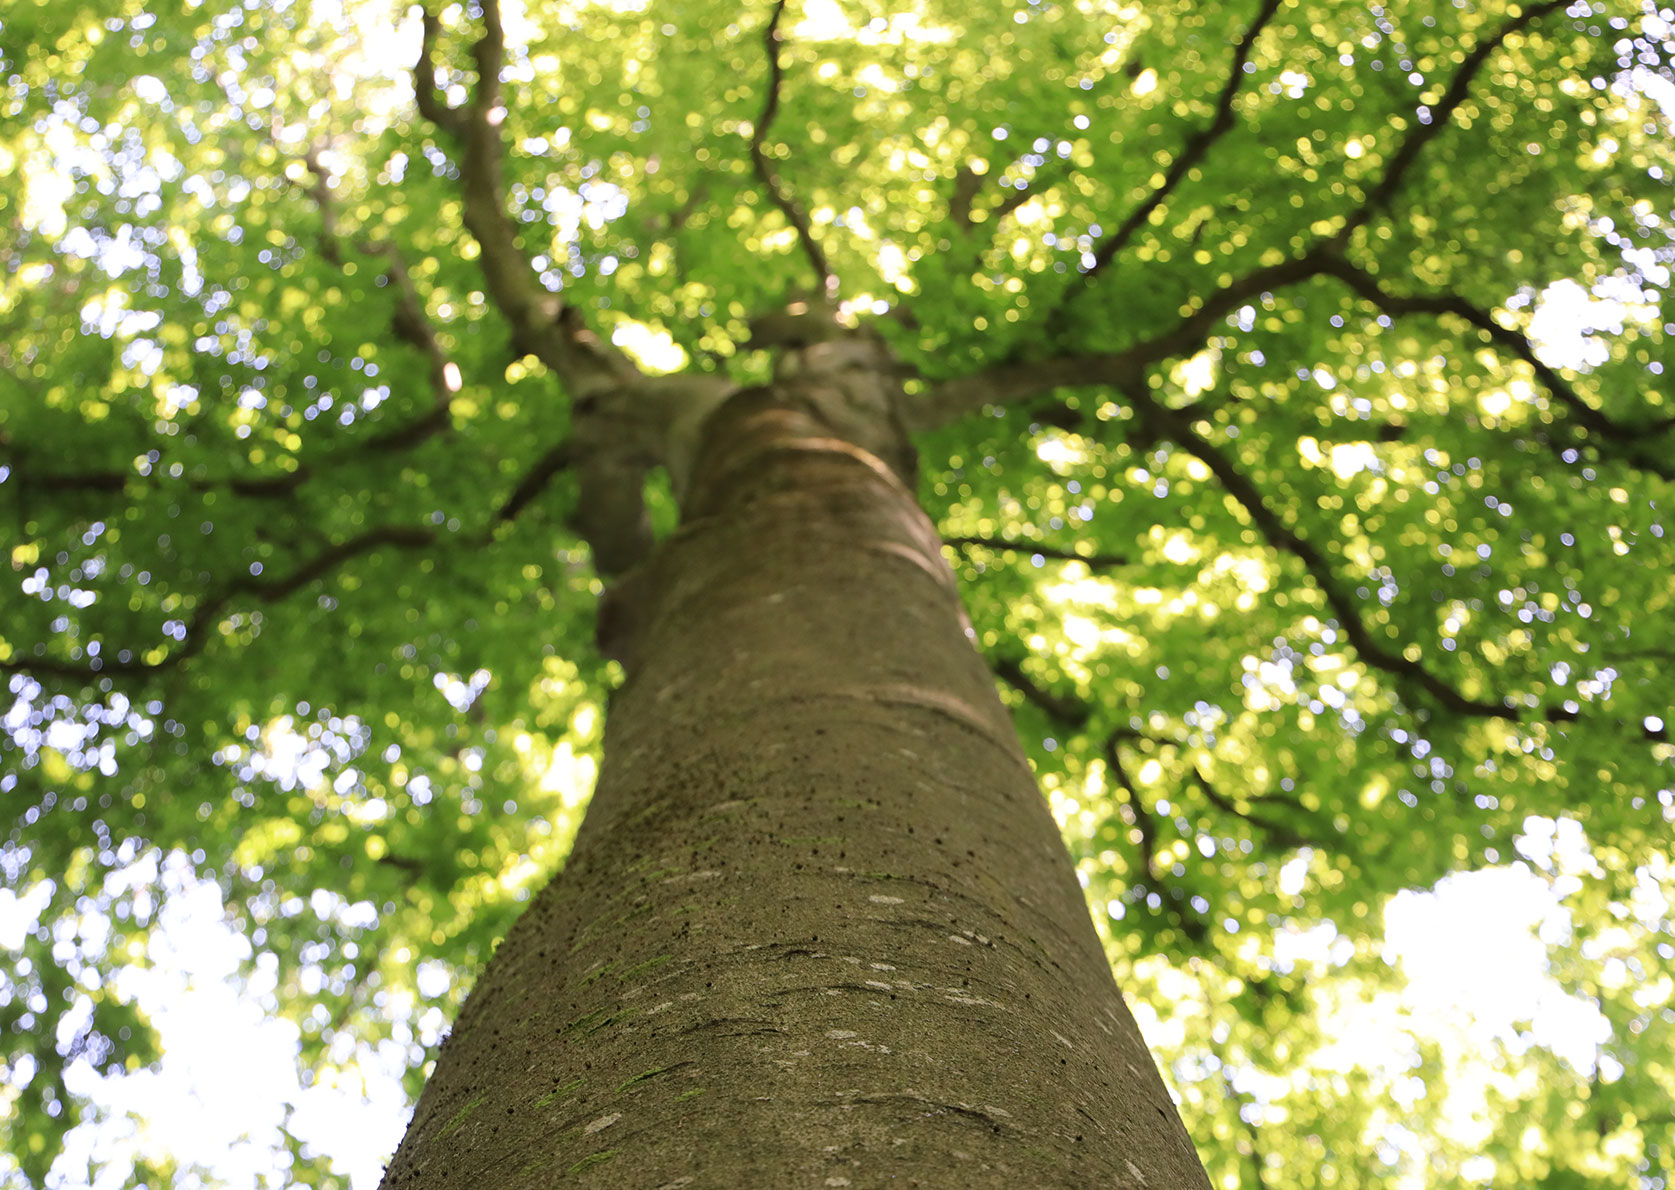 Staring up into a canopy of a beech tree